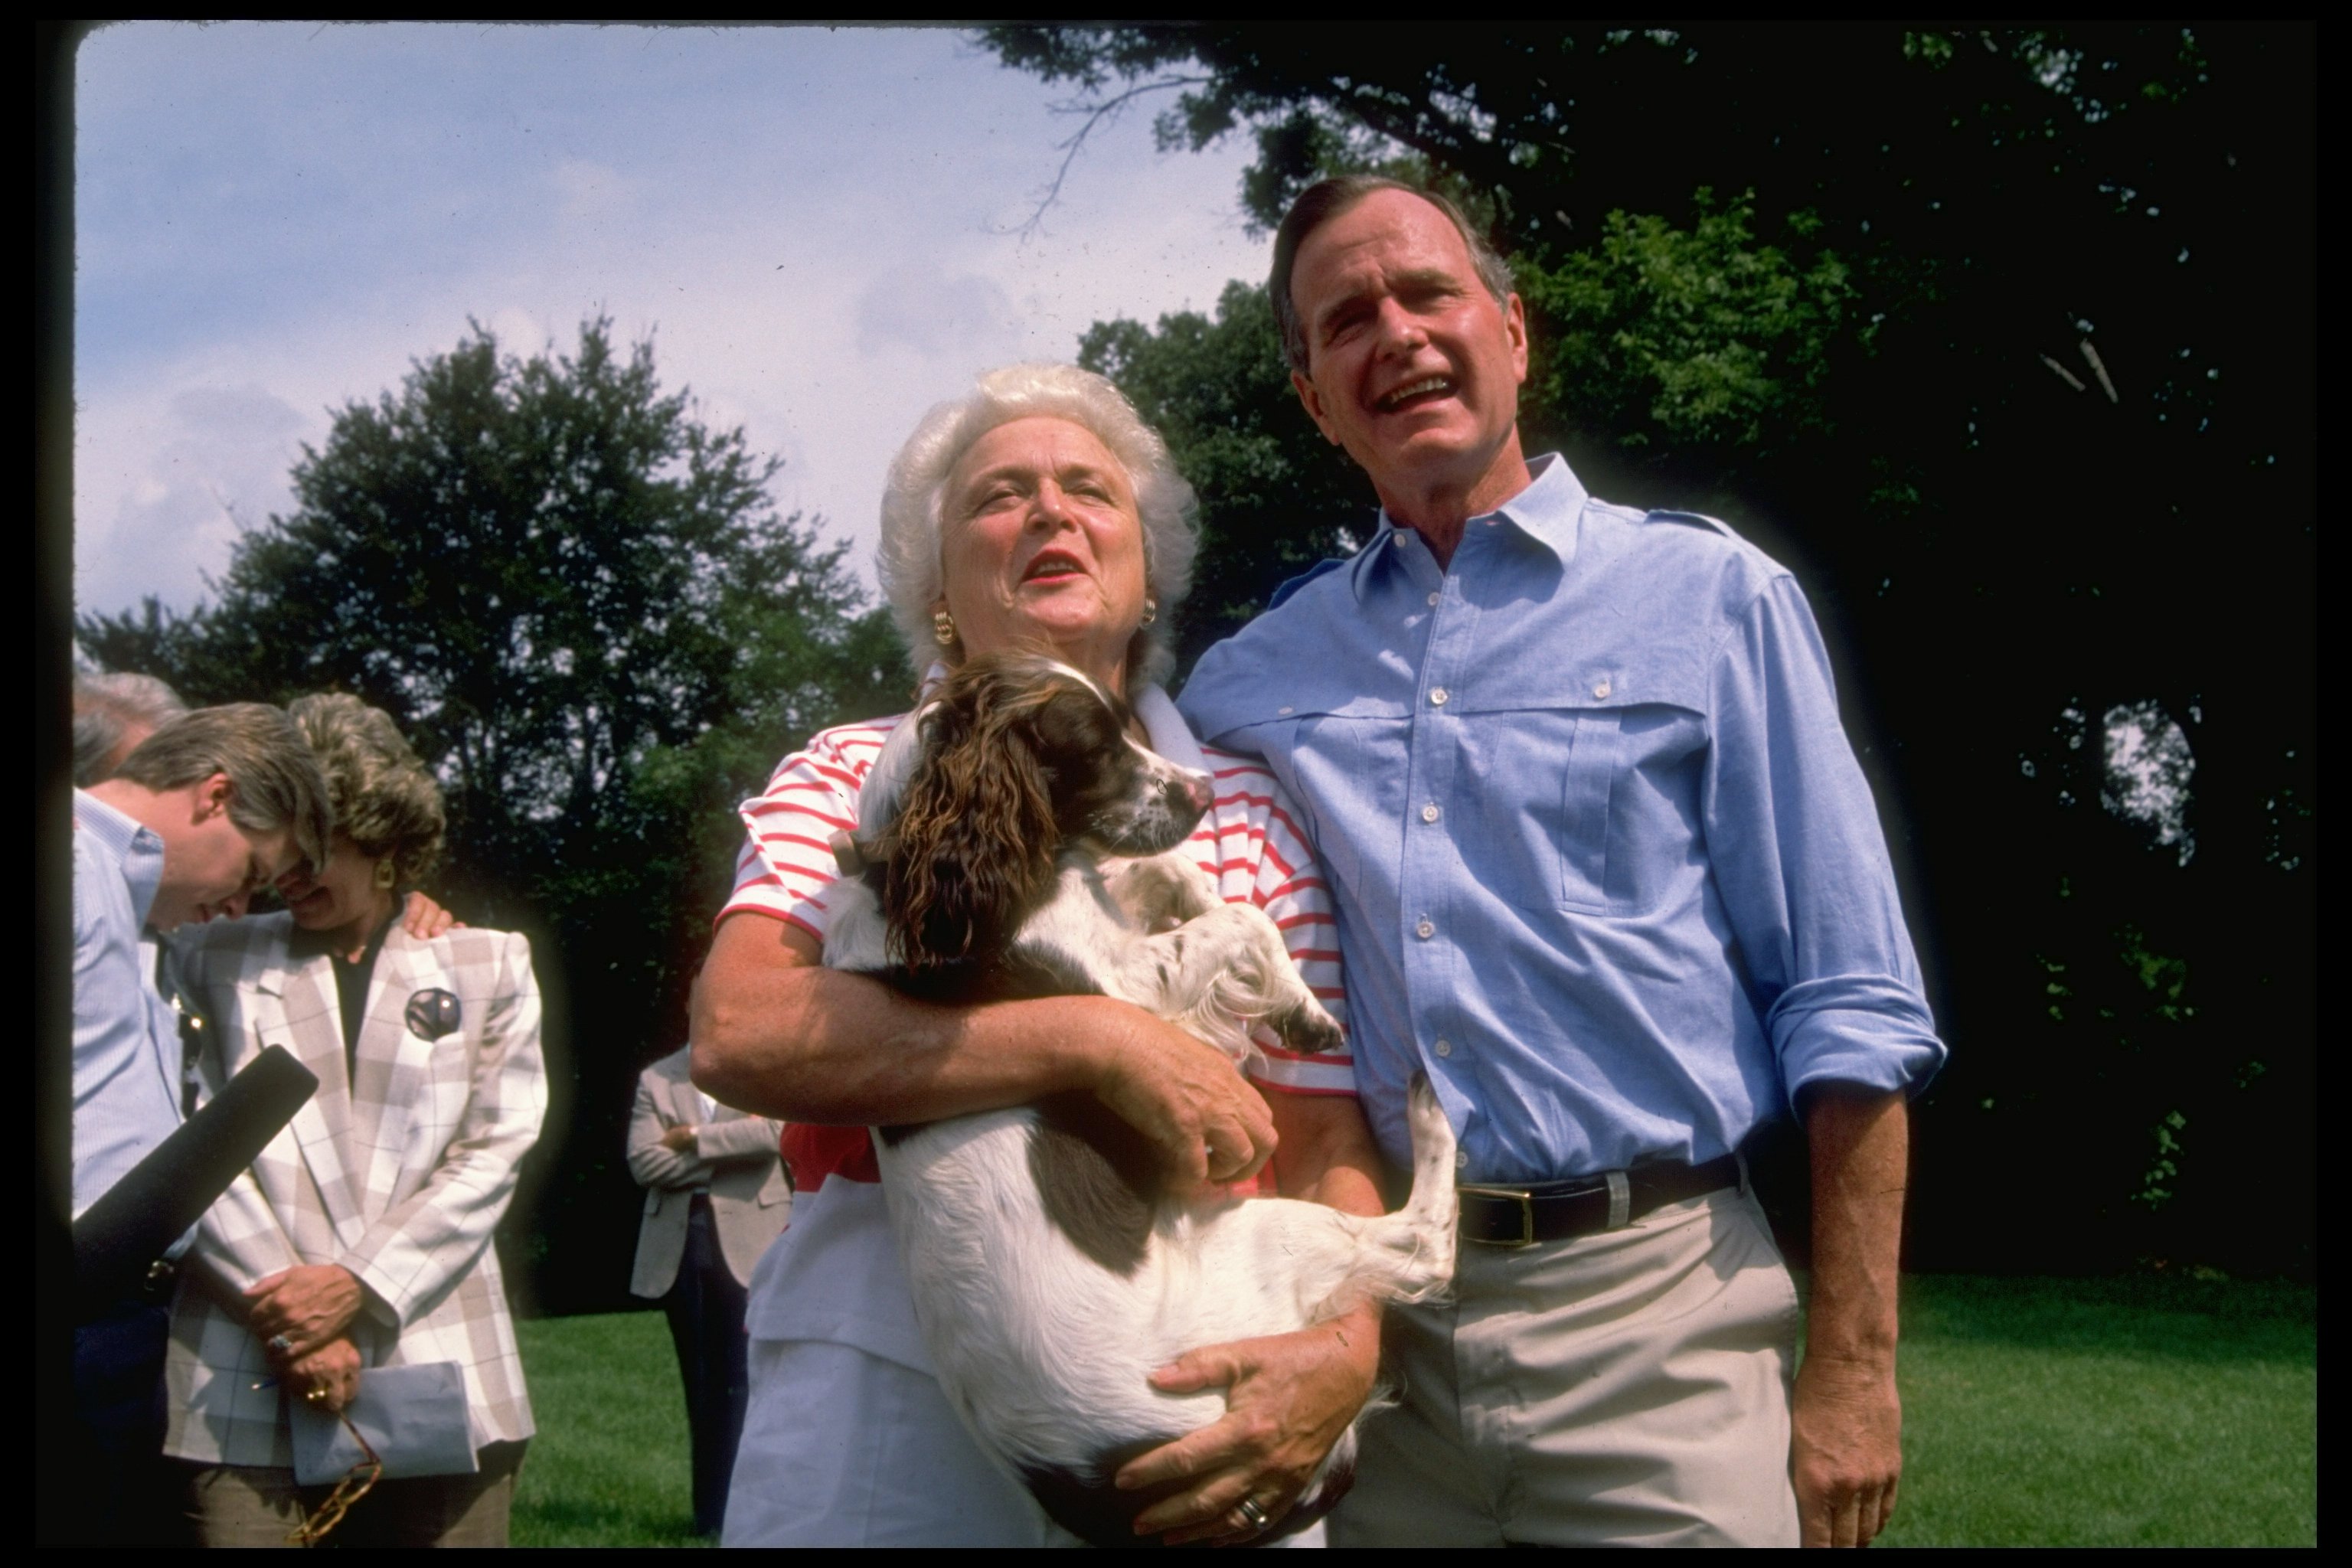 George & Barbara Bush speaking to reporters on lawn of their home at Naval Observatory, she holding family dog Millie. | Source: Getty Images